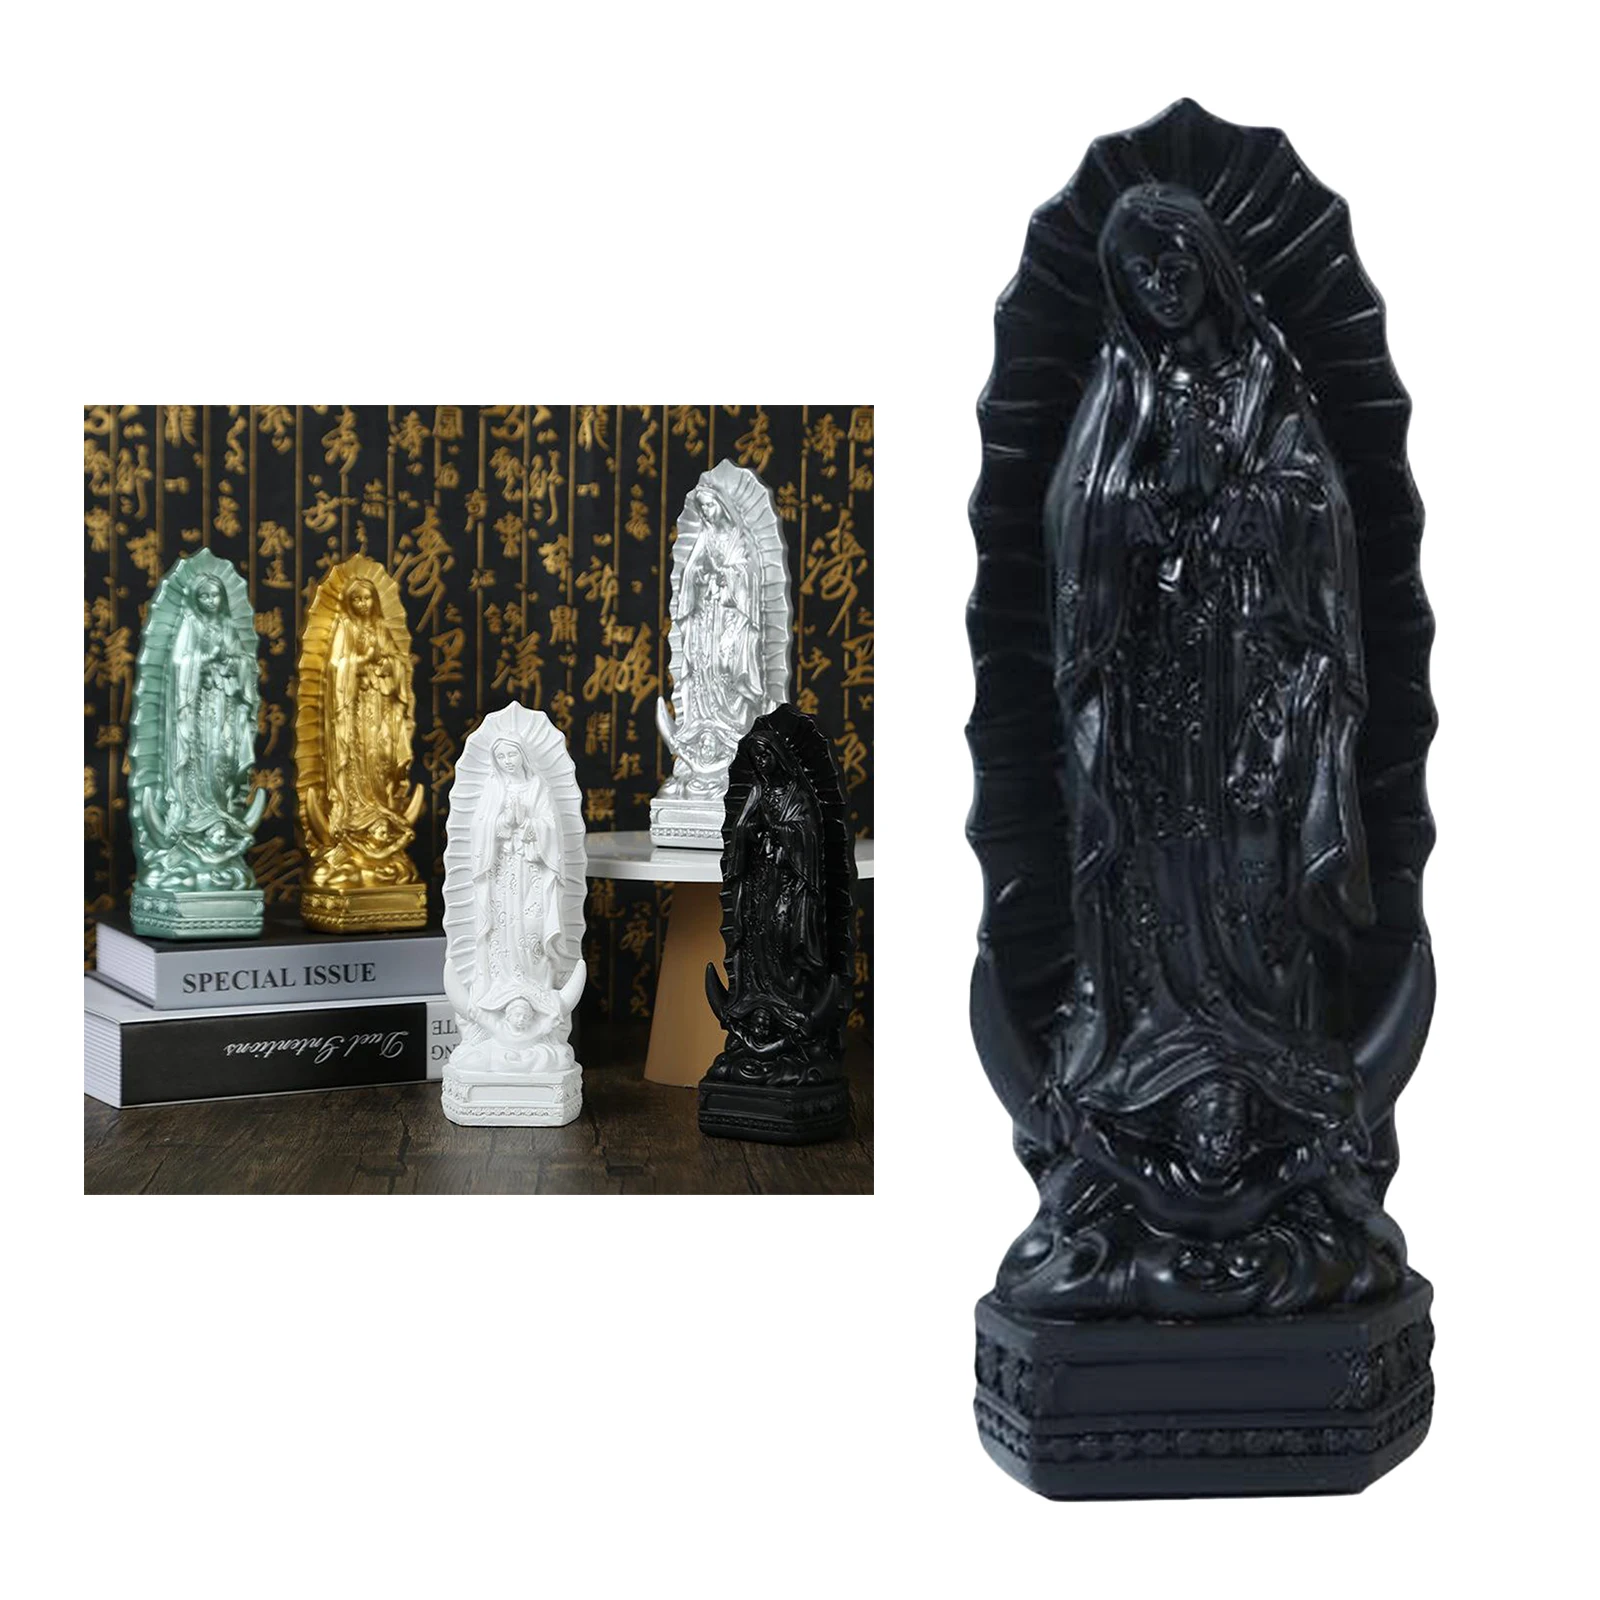 Mother of God Virgin Mary Virgin Mary Statue Sculpture Virgin Mary Figurine Our Lady of Lourdes Decorative Statue Ornament